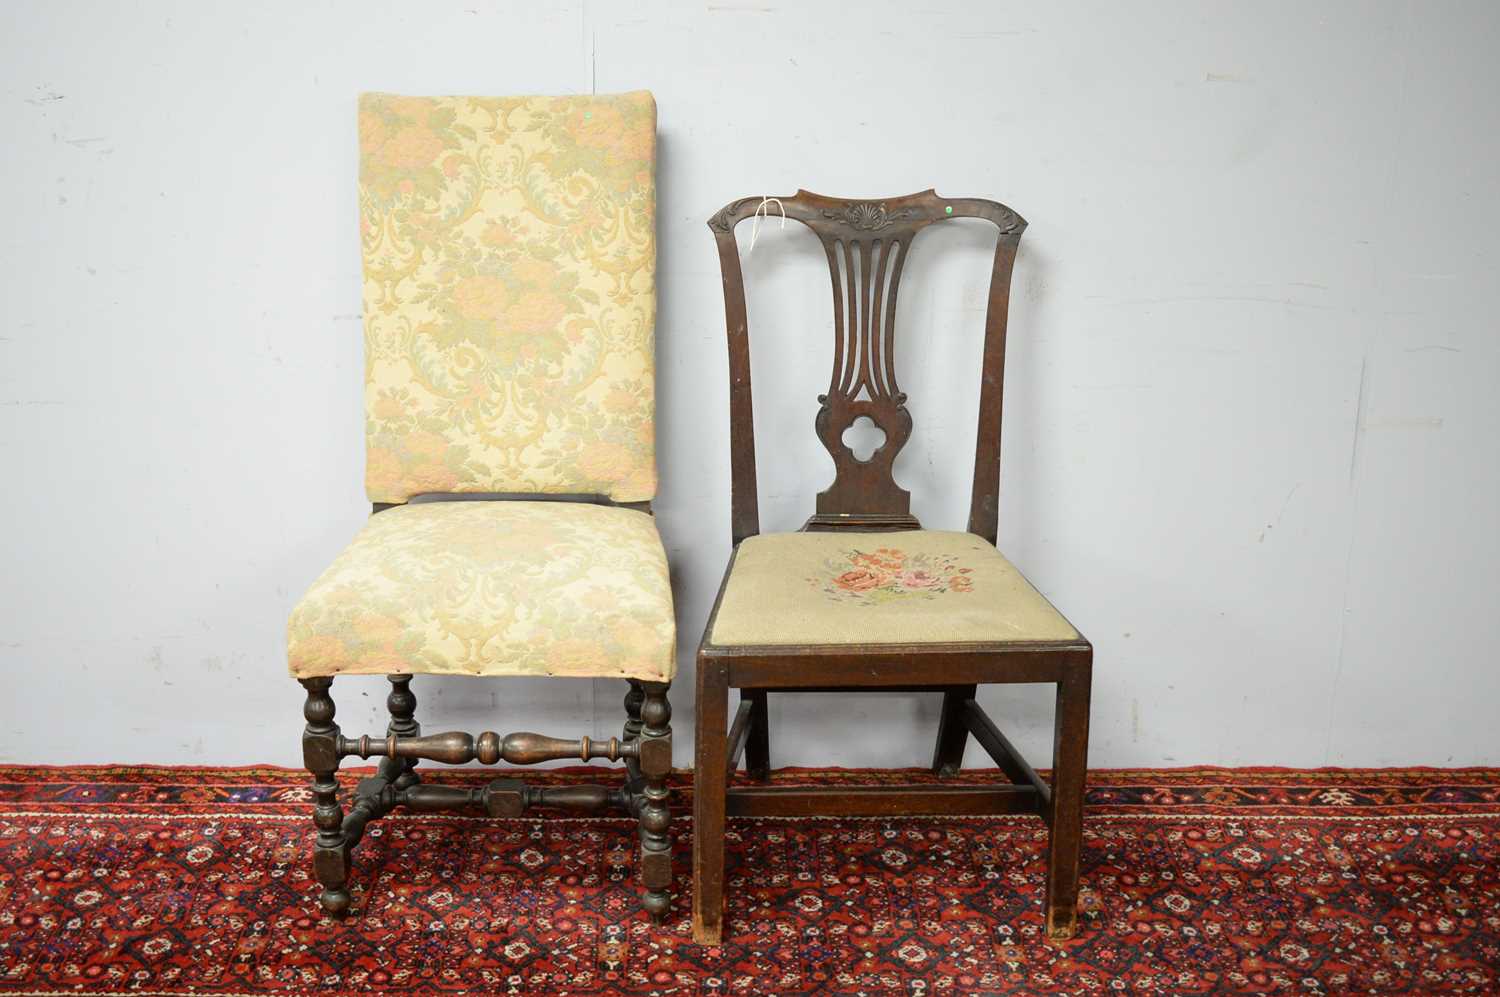 19th C dining chair; and a 19th C high back chair.